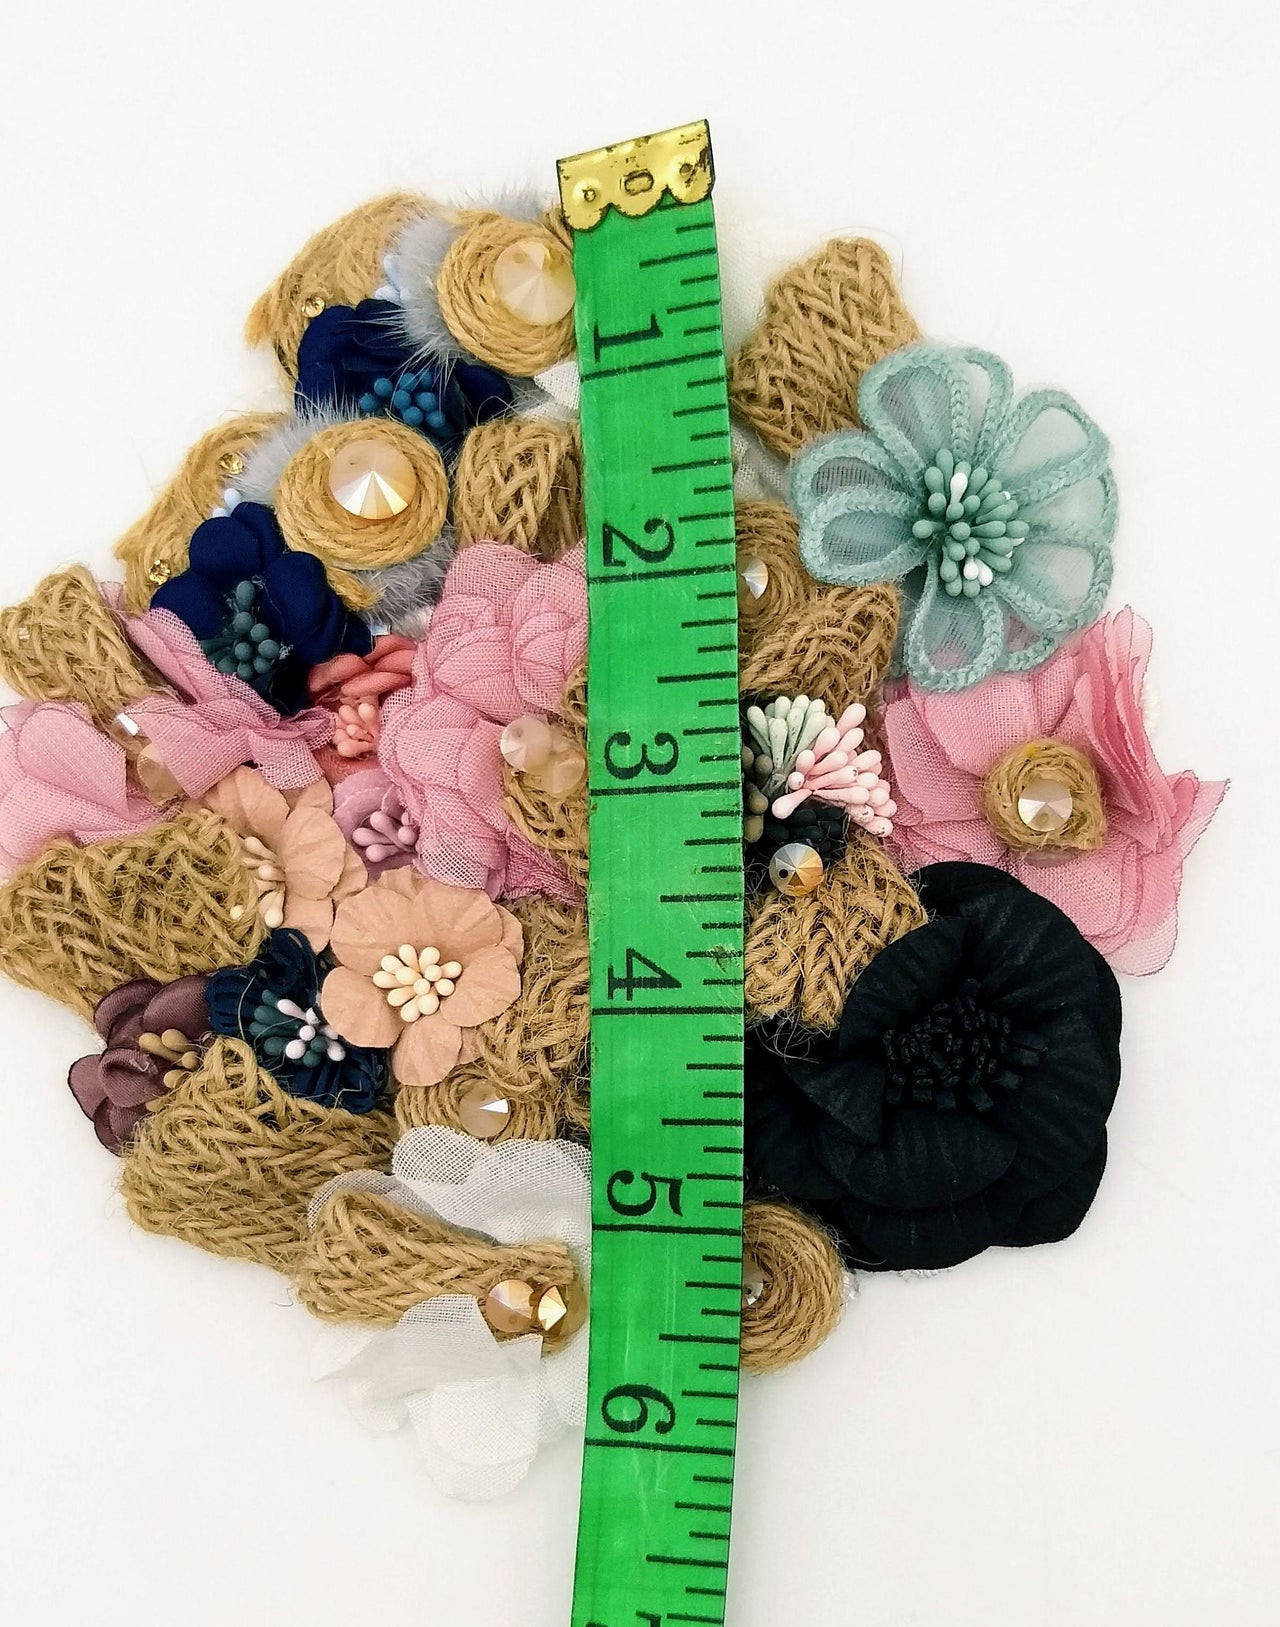 Handcrafted Jute Floral Applique in Pink, Black, Navy Blue and Teal Blue